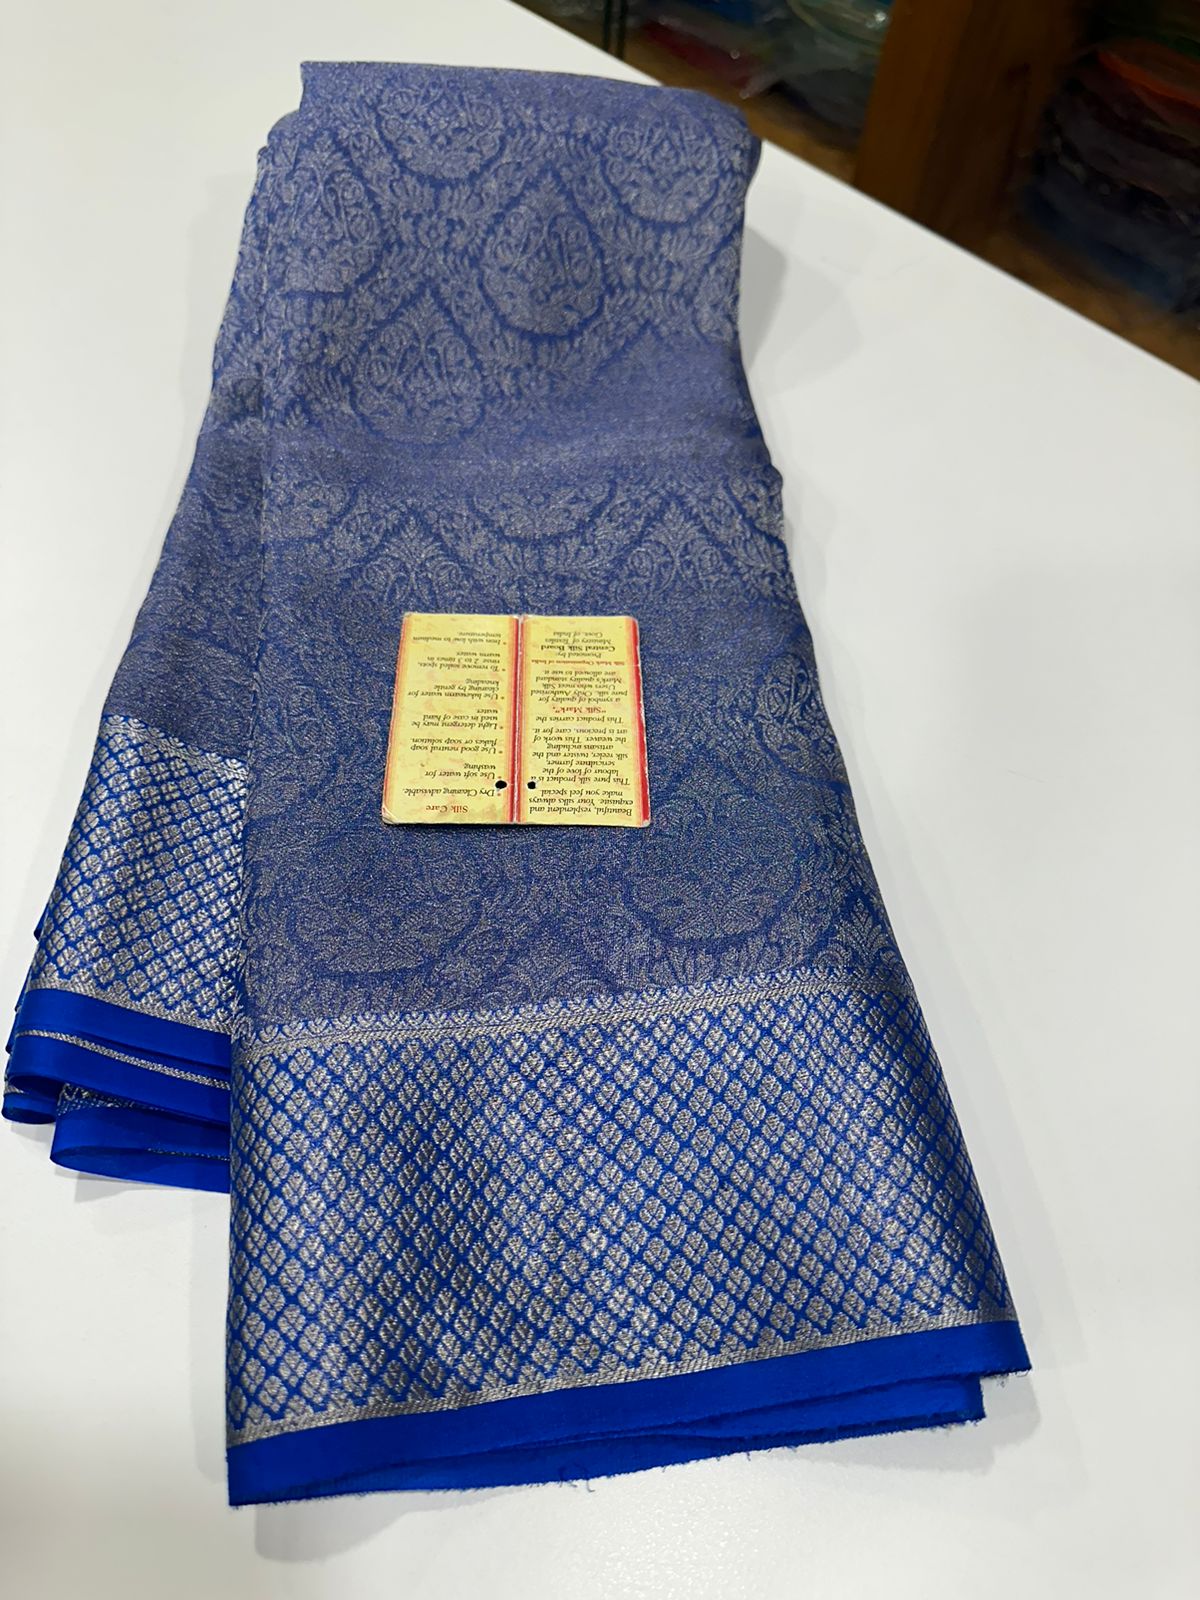 Pure brocade Mysore silk sarees with 120 grm thickness and beautiful Silk brocade fabric with zari weaving allover saree with rich pallu n plain blouse with borders